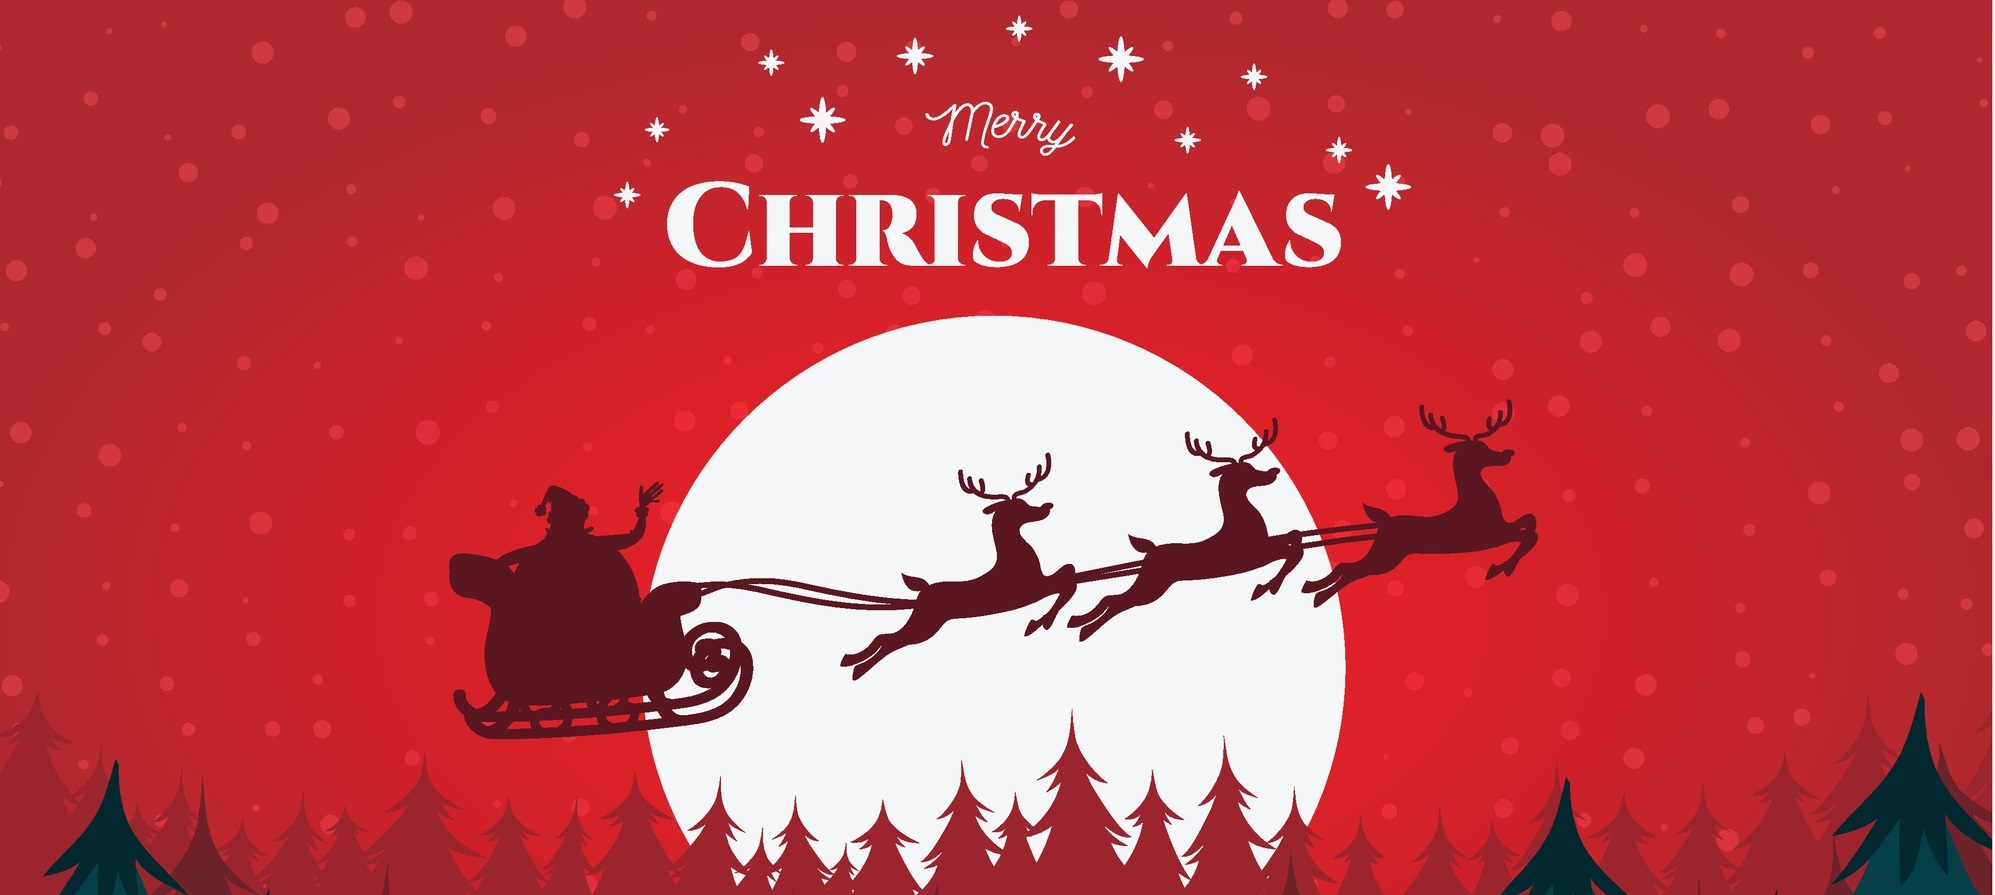 Say Merry Christmas in 10 different languages - ITC Translations